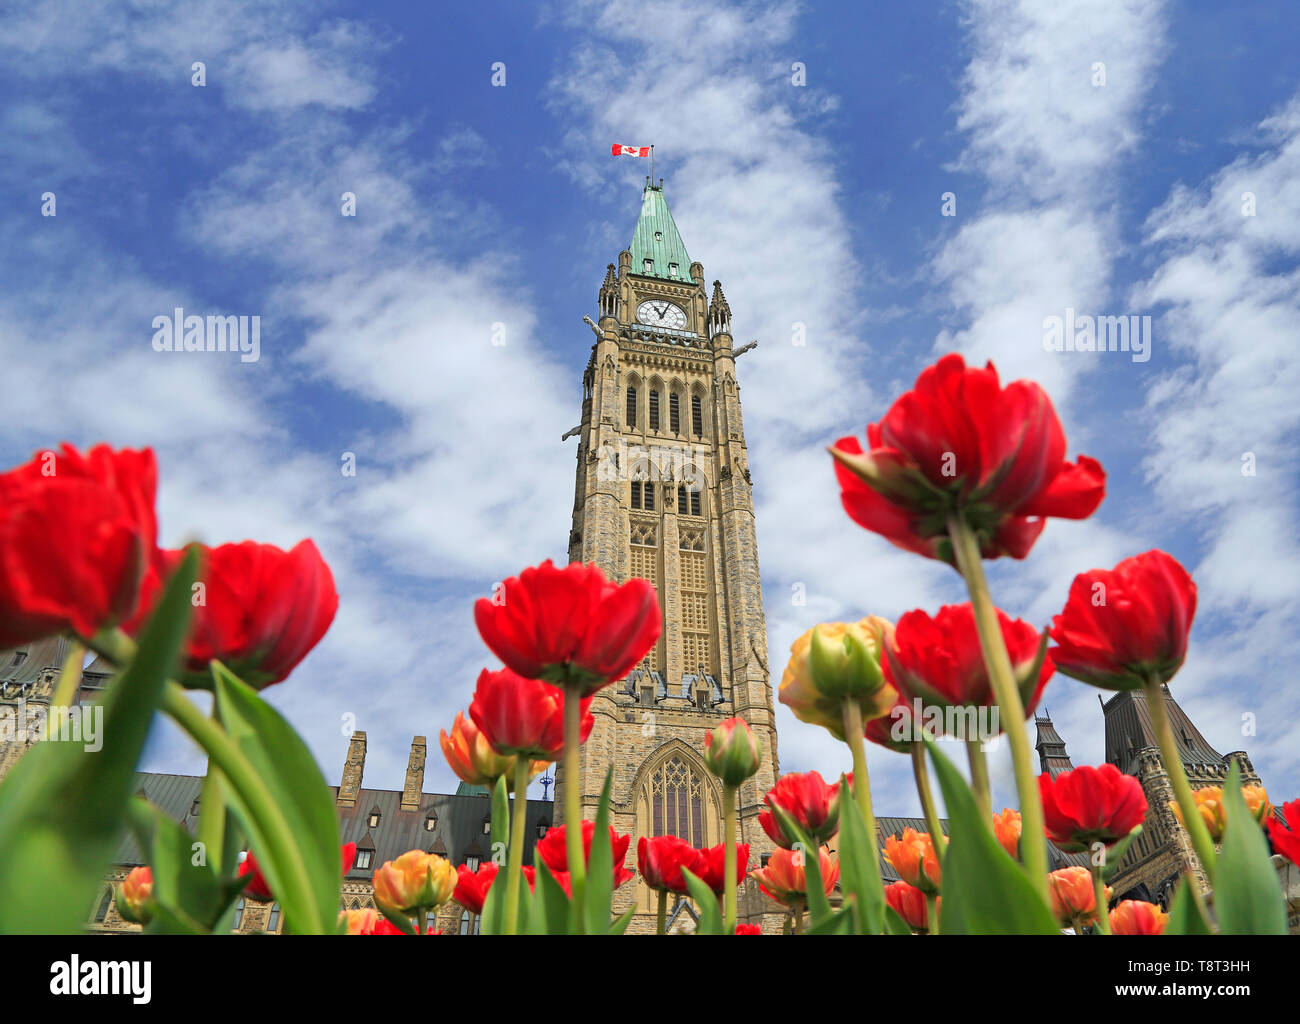 The Parliament of Canada with red tulip flowers in the foreground, Ontario Stock Photo